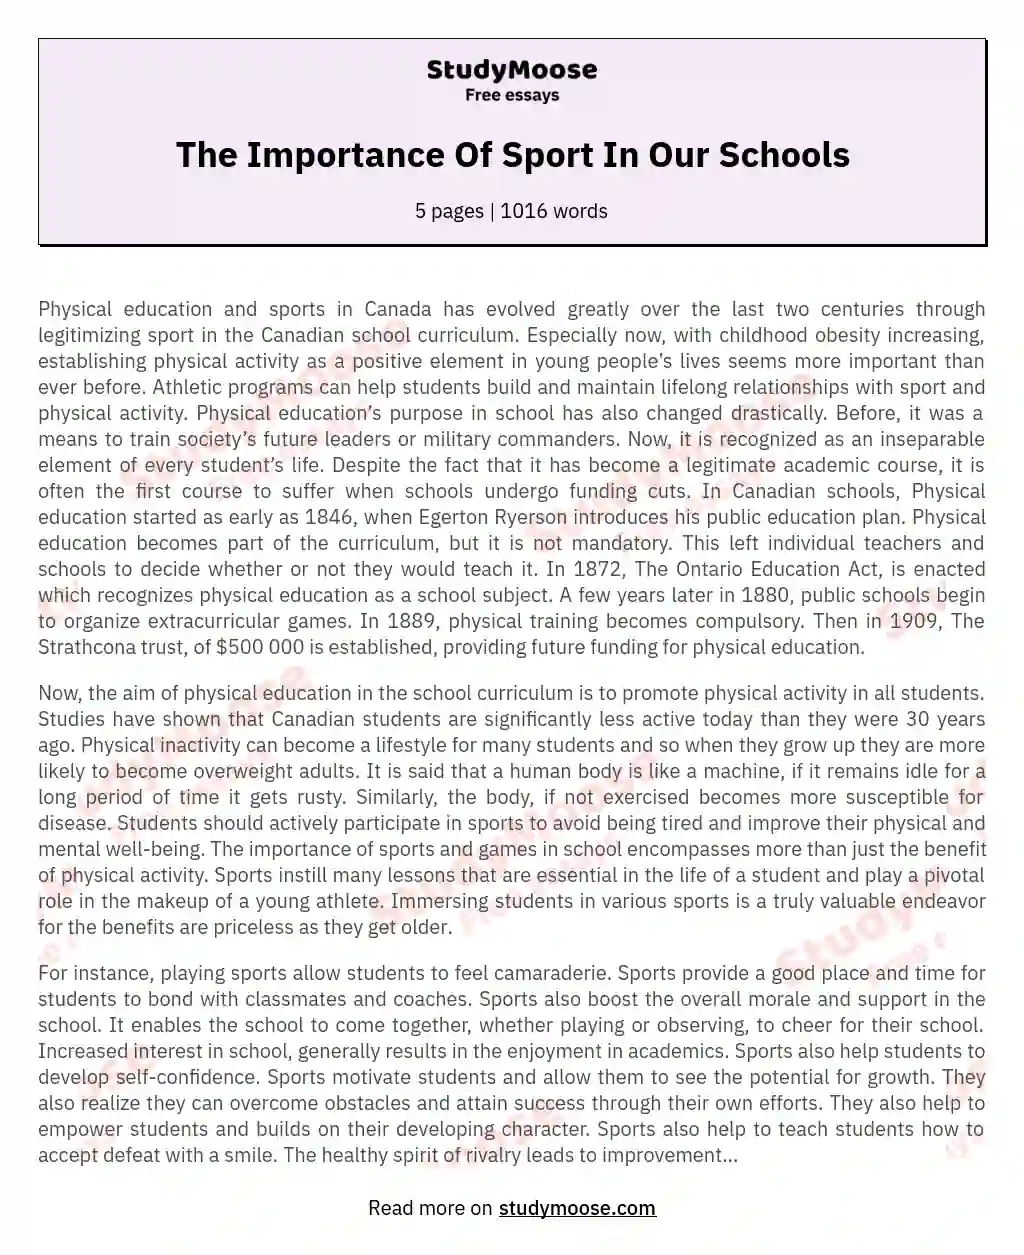 The Importance Of Sport In Our Schools essay